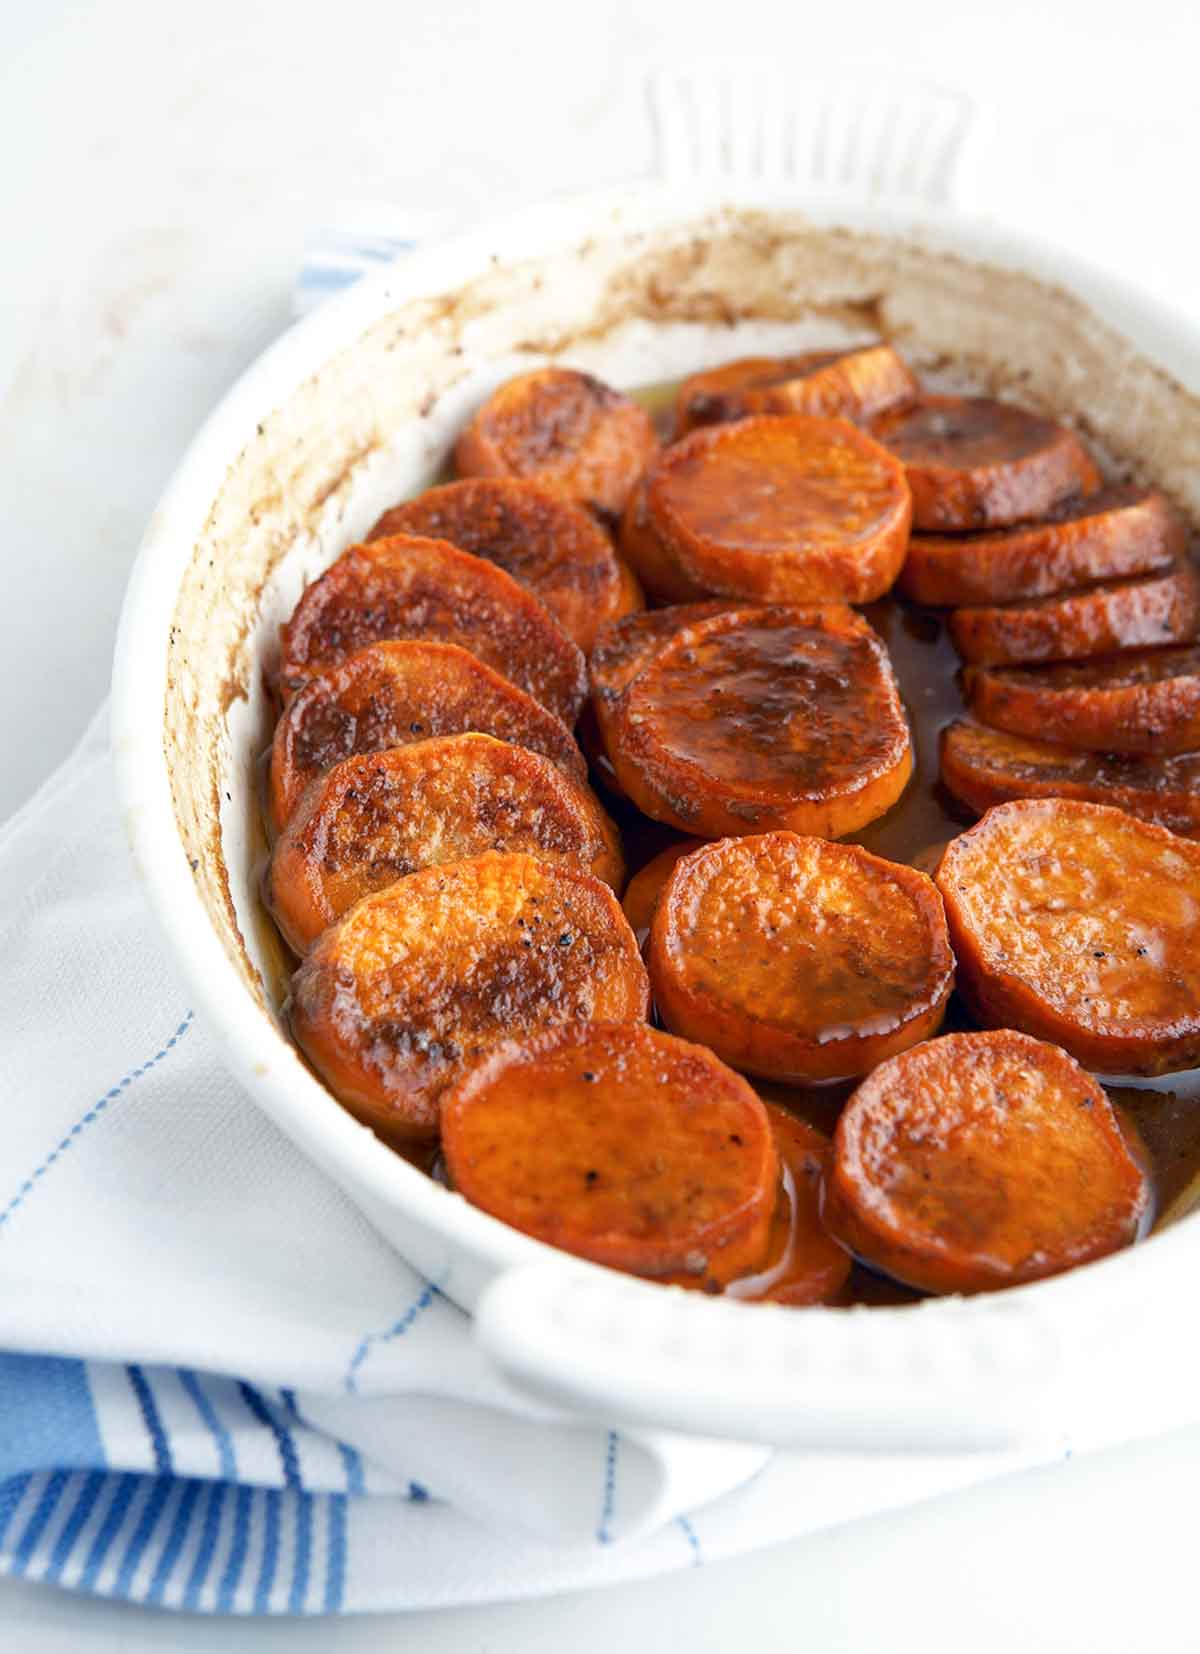 Bourbon sweet potatoes in a white oval baking dish, sitting on a white and blue tea towel.